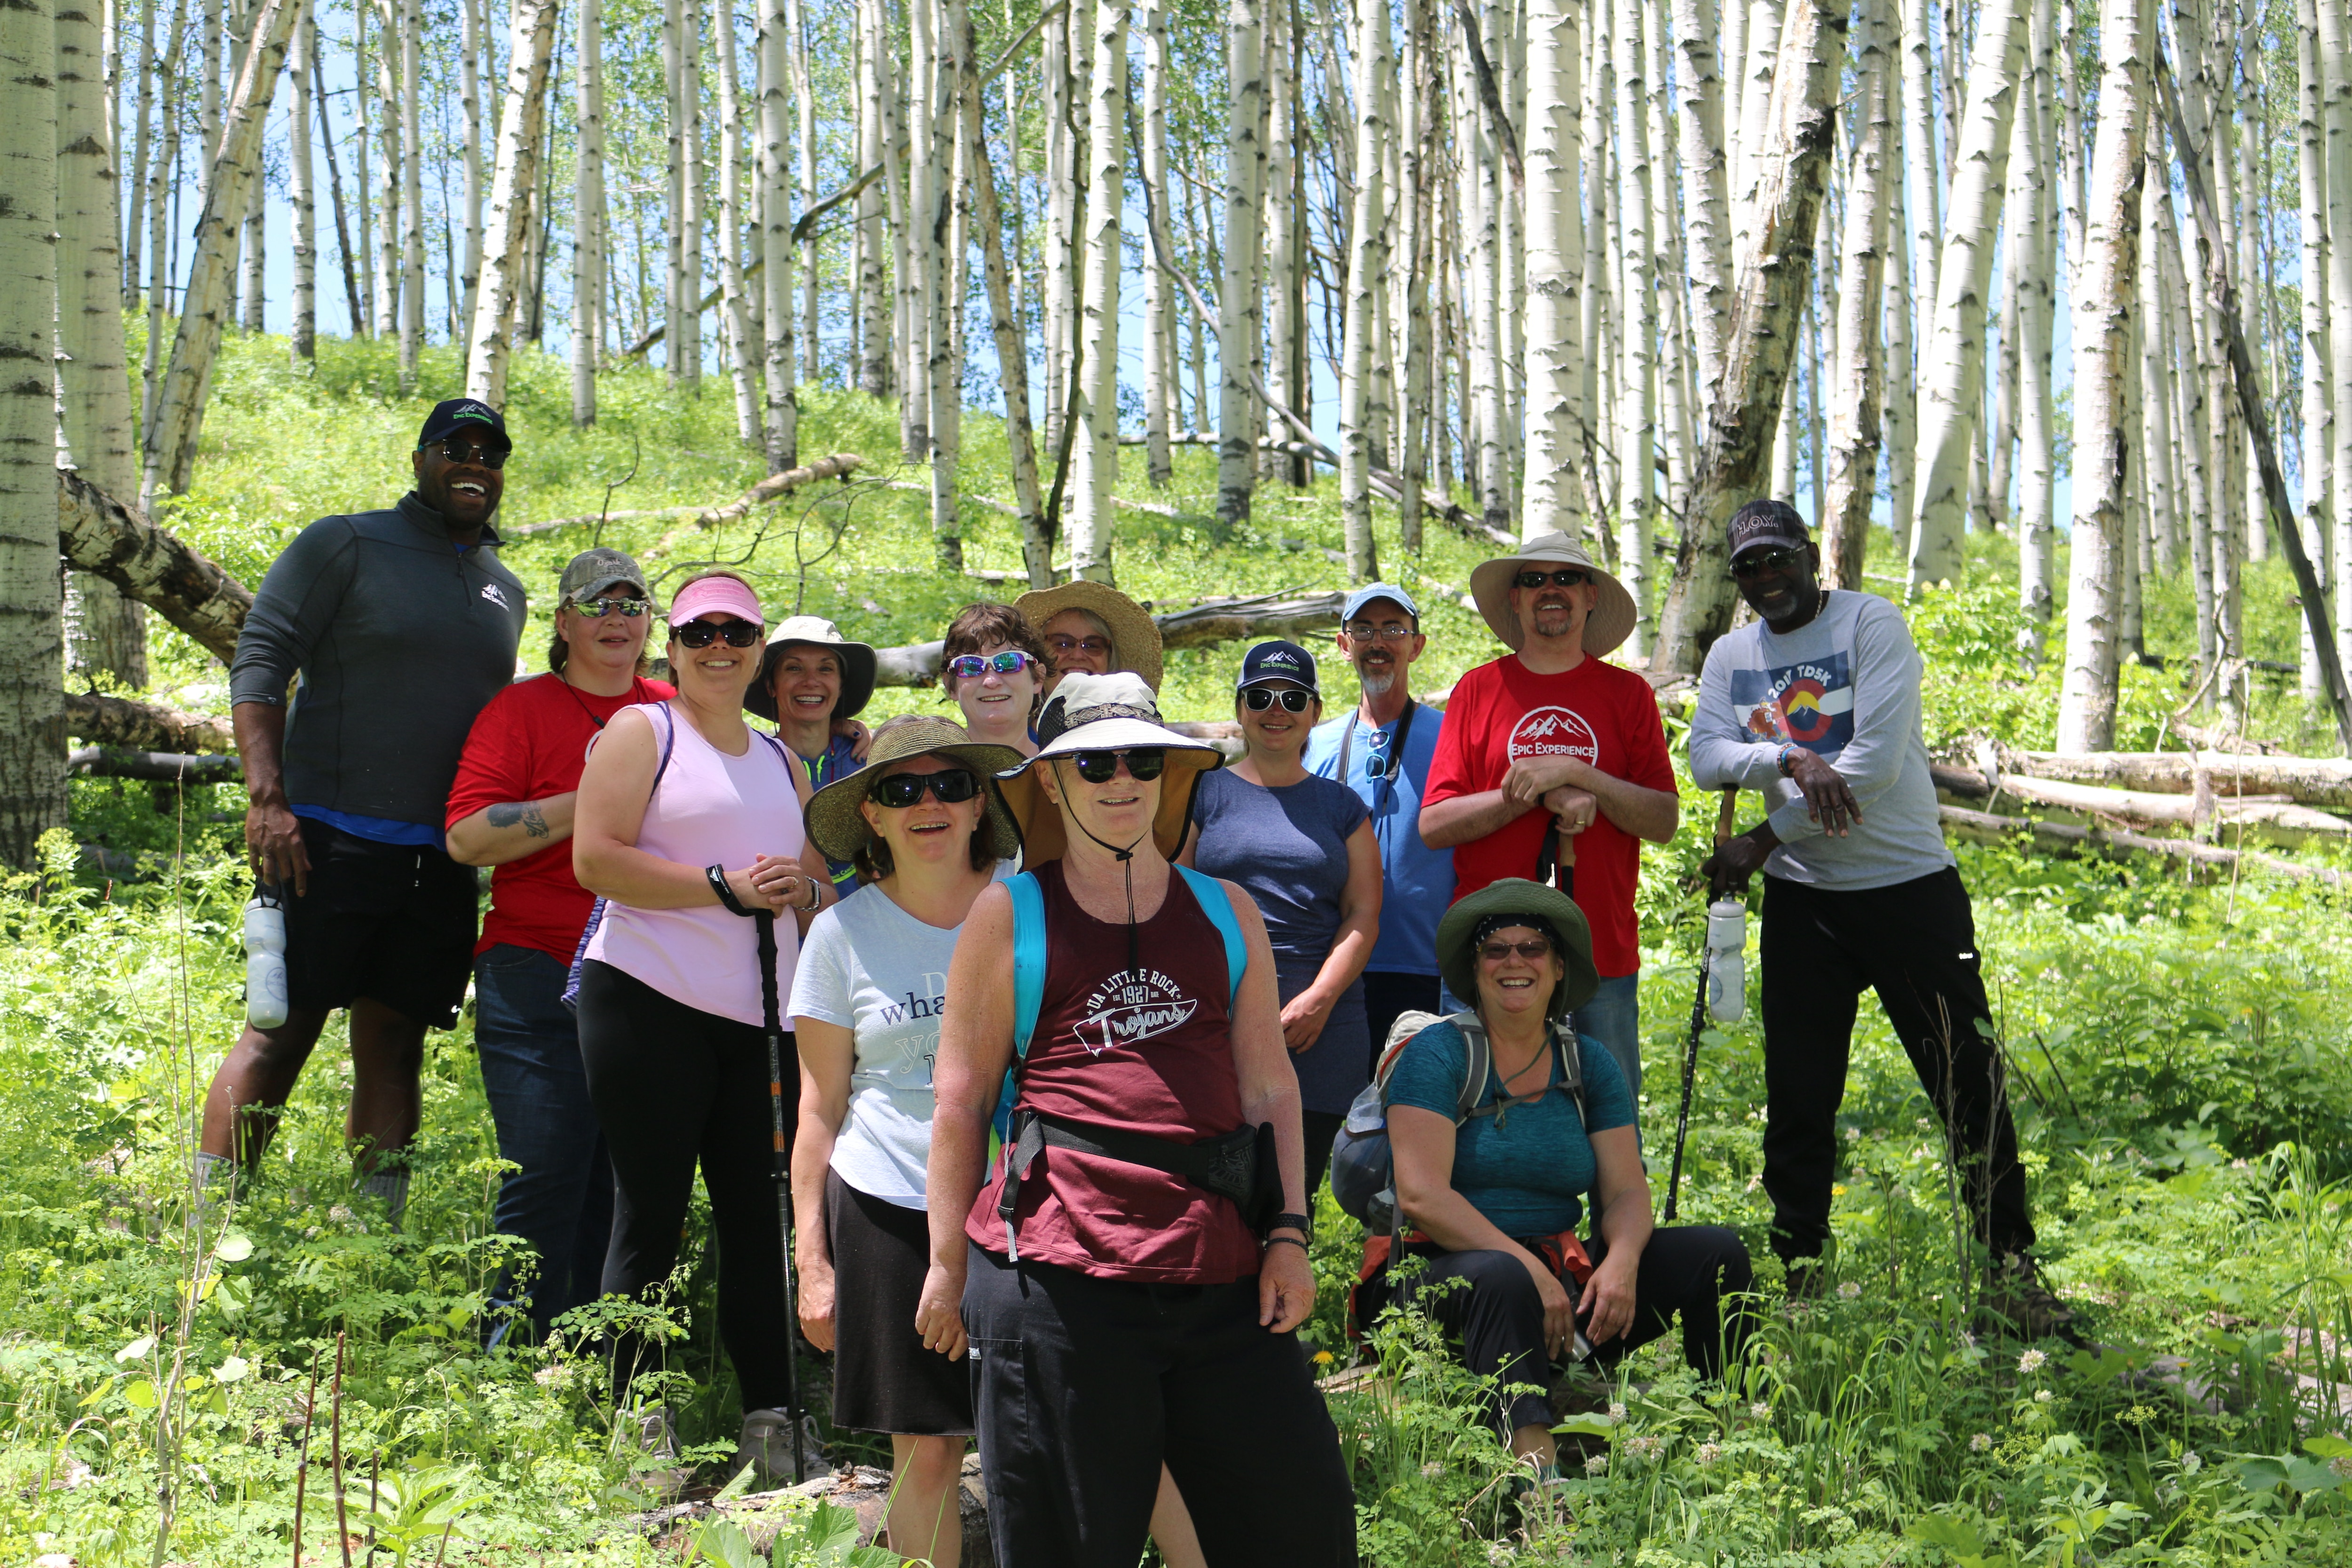 group of people standing and smiling in a forest